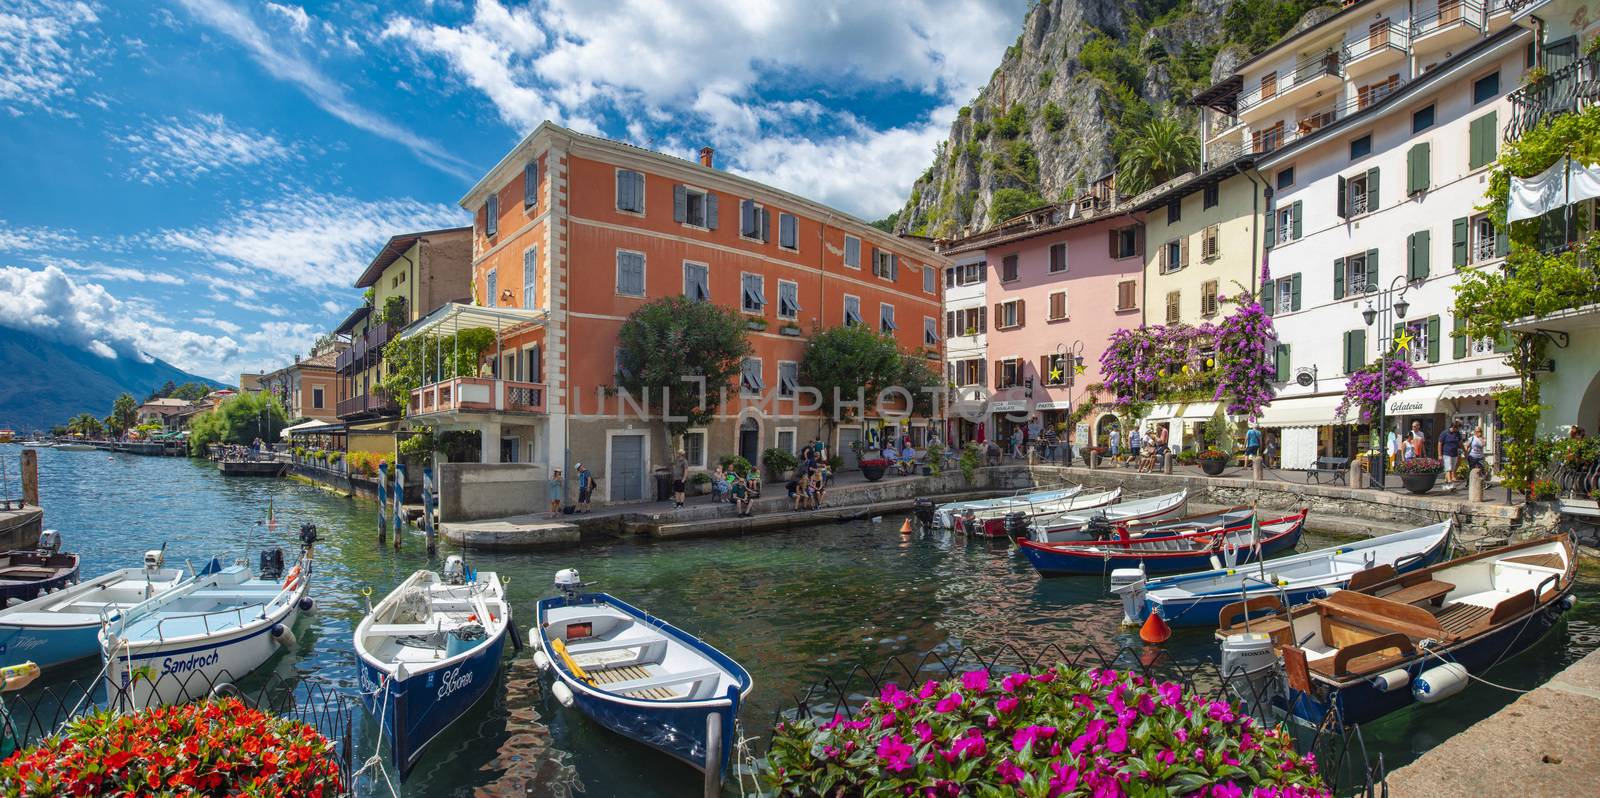 Limone, Lake Garda, Italy, August 2019, A view of the small town of Limone